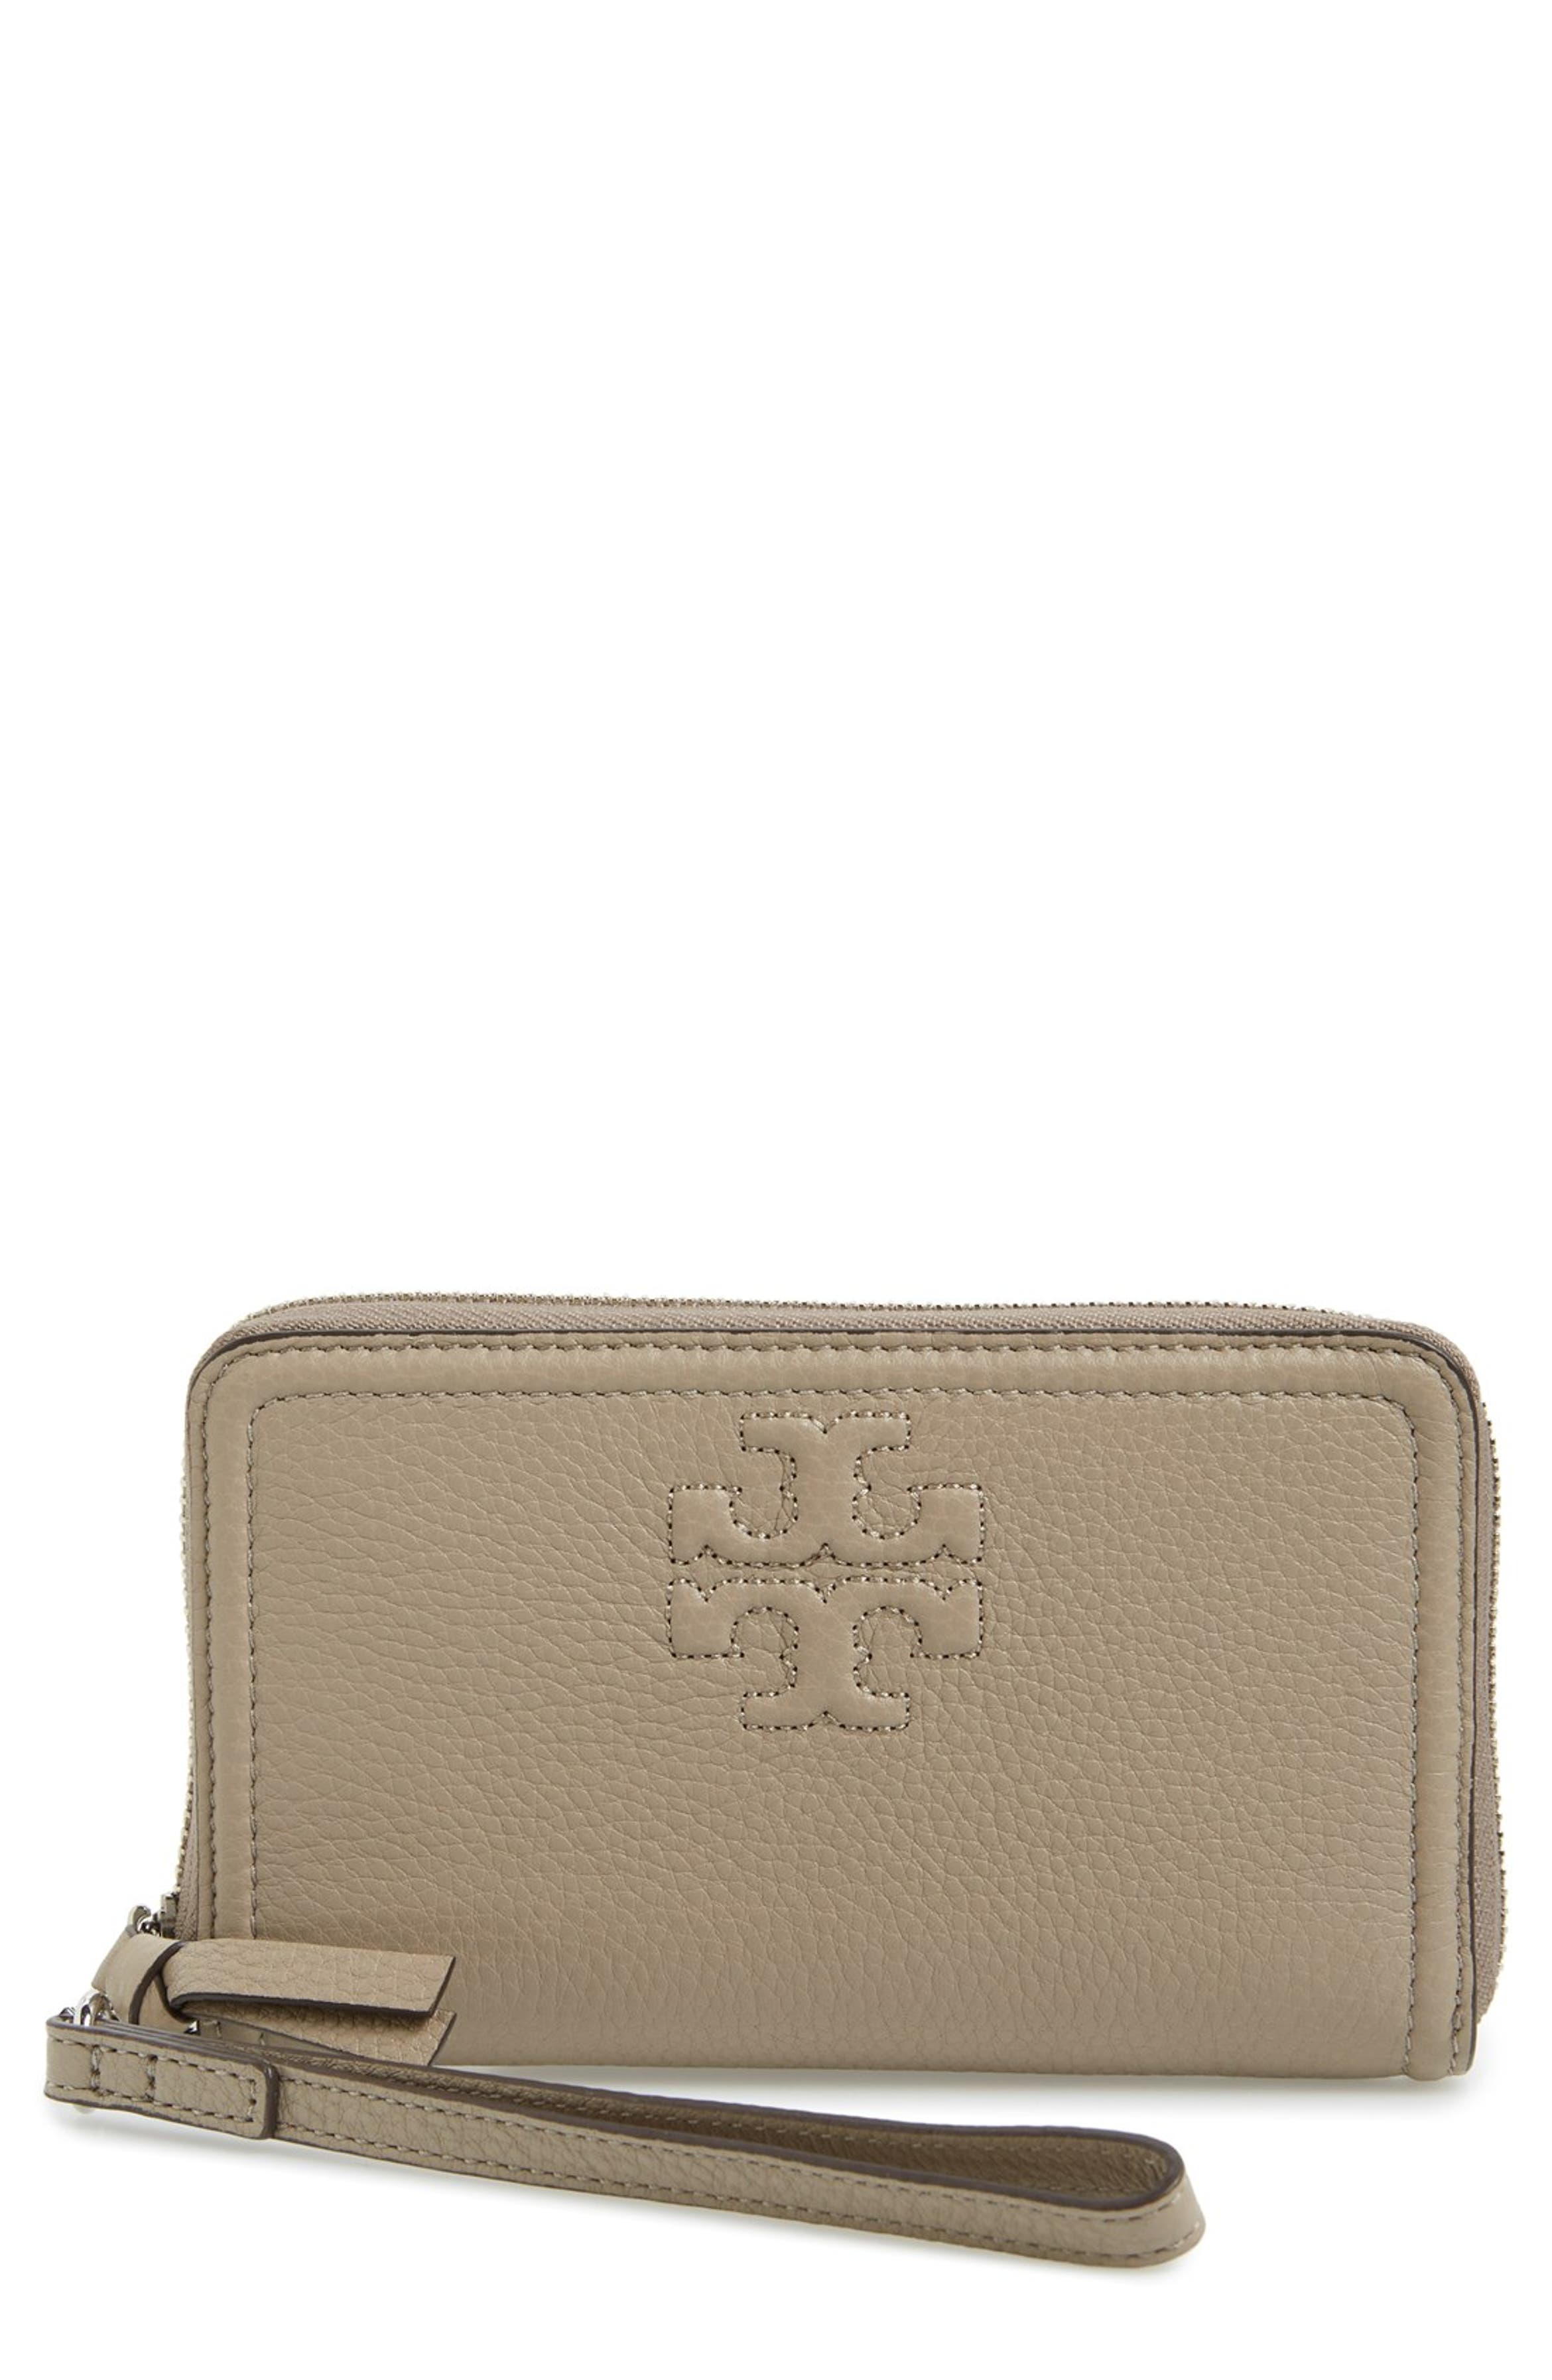 Tory Burch 'Thea' Leather Wristlet | Nordstrom